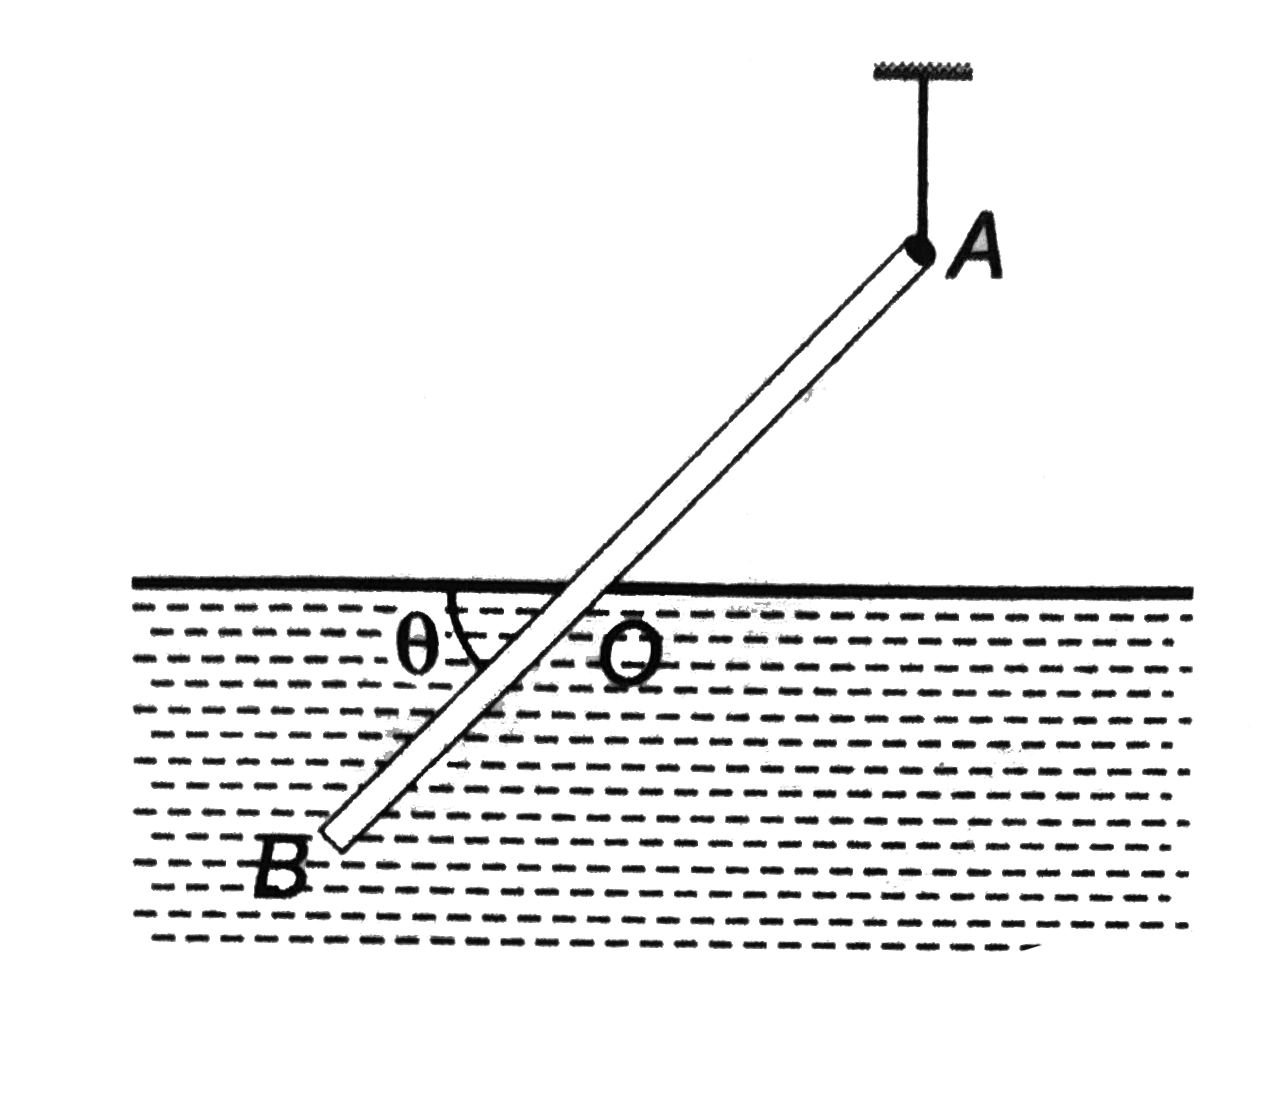 A uniform rod AB, 4m long and weighing 12 kg, is supported at end A, with a 6 kg lead weight at B. The rod floats as shown in figure with one-half of its length submerged. The buoyant force on the lead mass is negligible as it is of negligible volume. Find the tension in the cord and the total volume of the rod